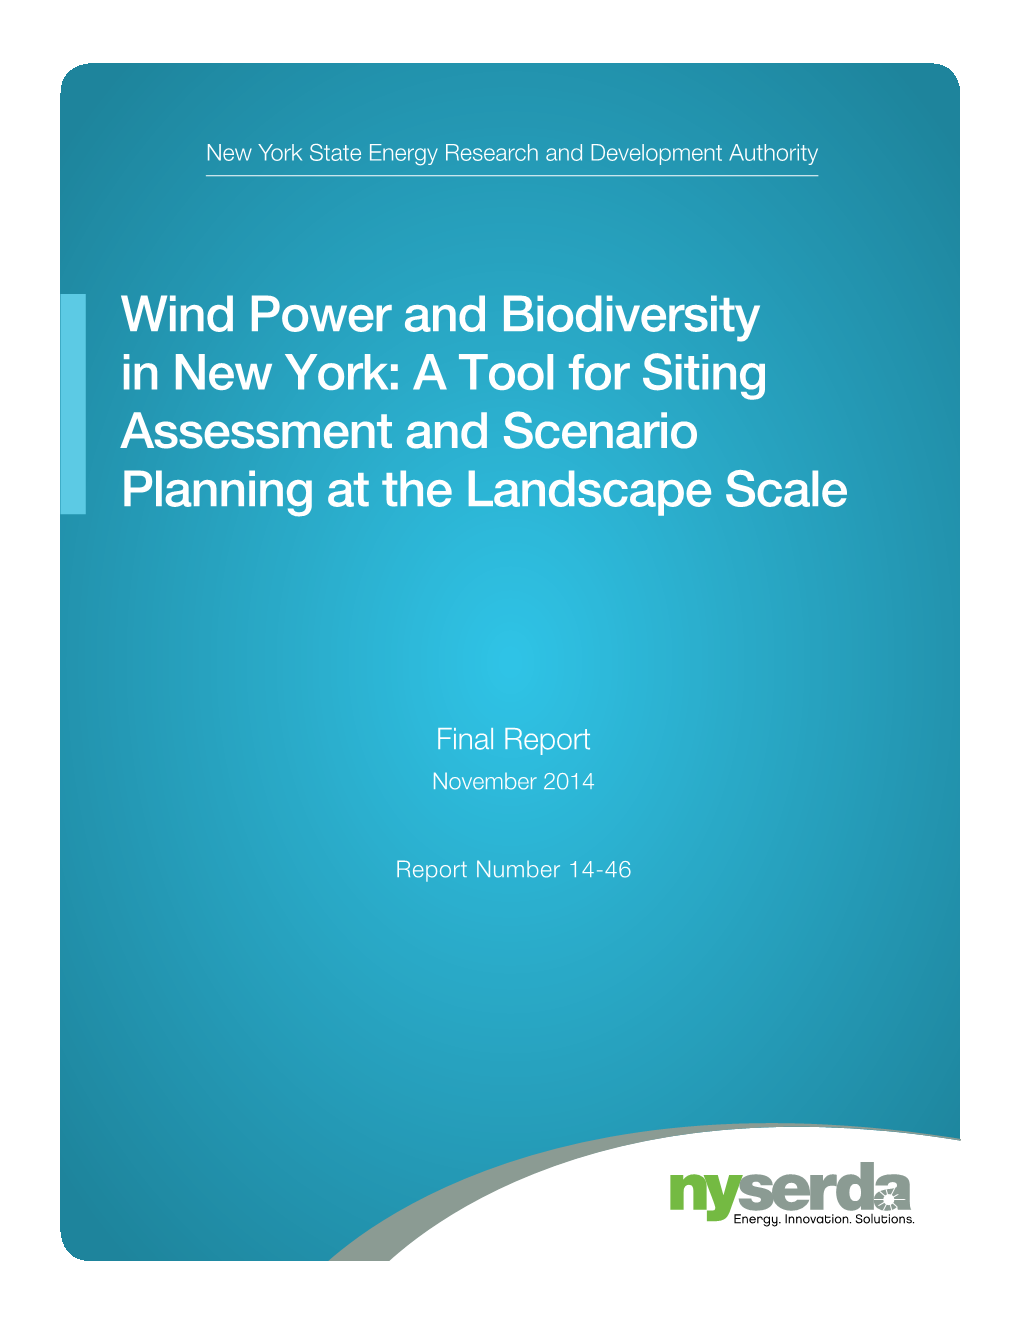 Wind Power and Biodiversity in New York: a Tool for Siting Assessment and Scenario Planning at the Landscape Scale